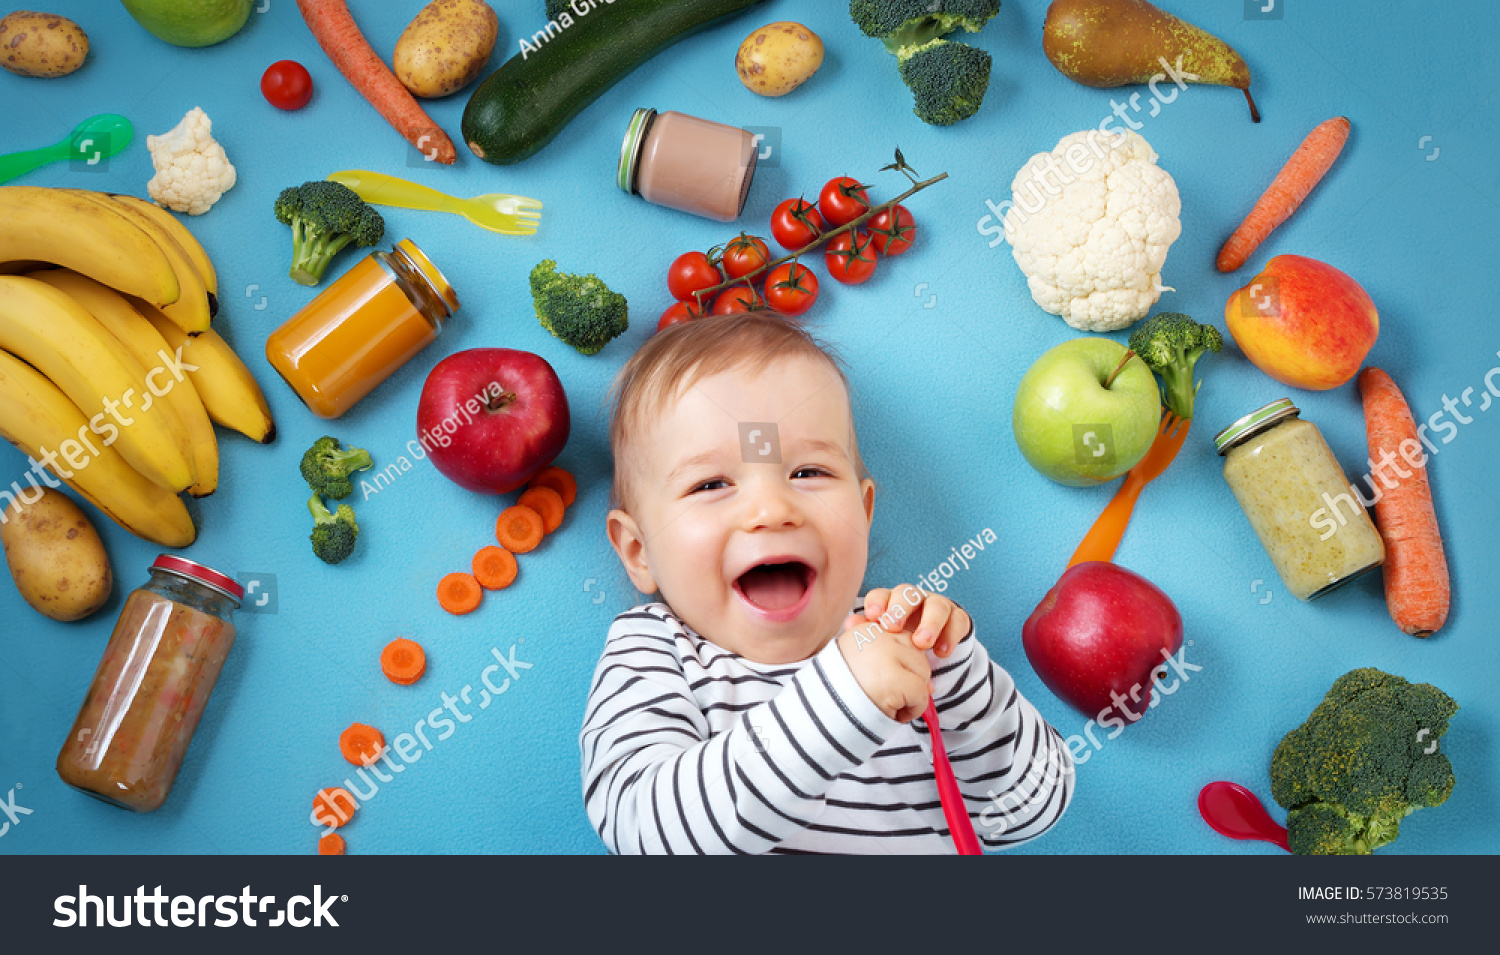 baby surrounded with fruits and vegetables on blue blanket, healthy child nutrition #573819535